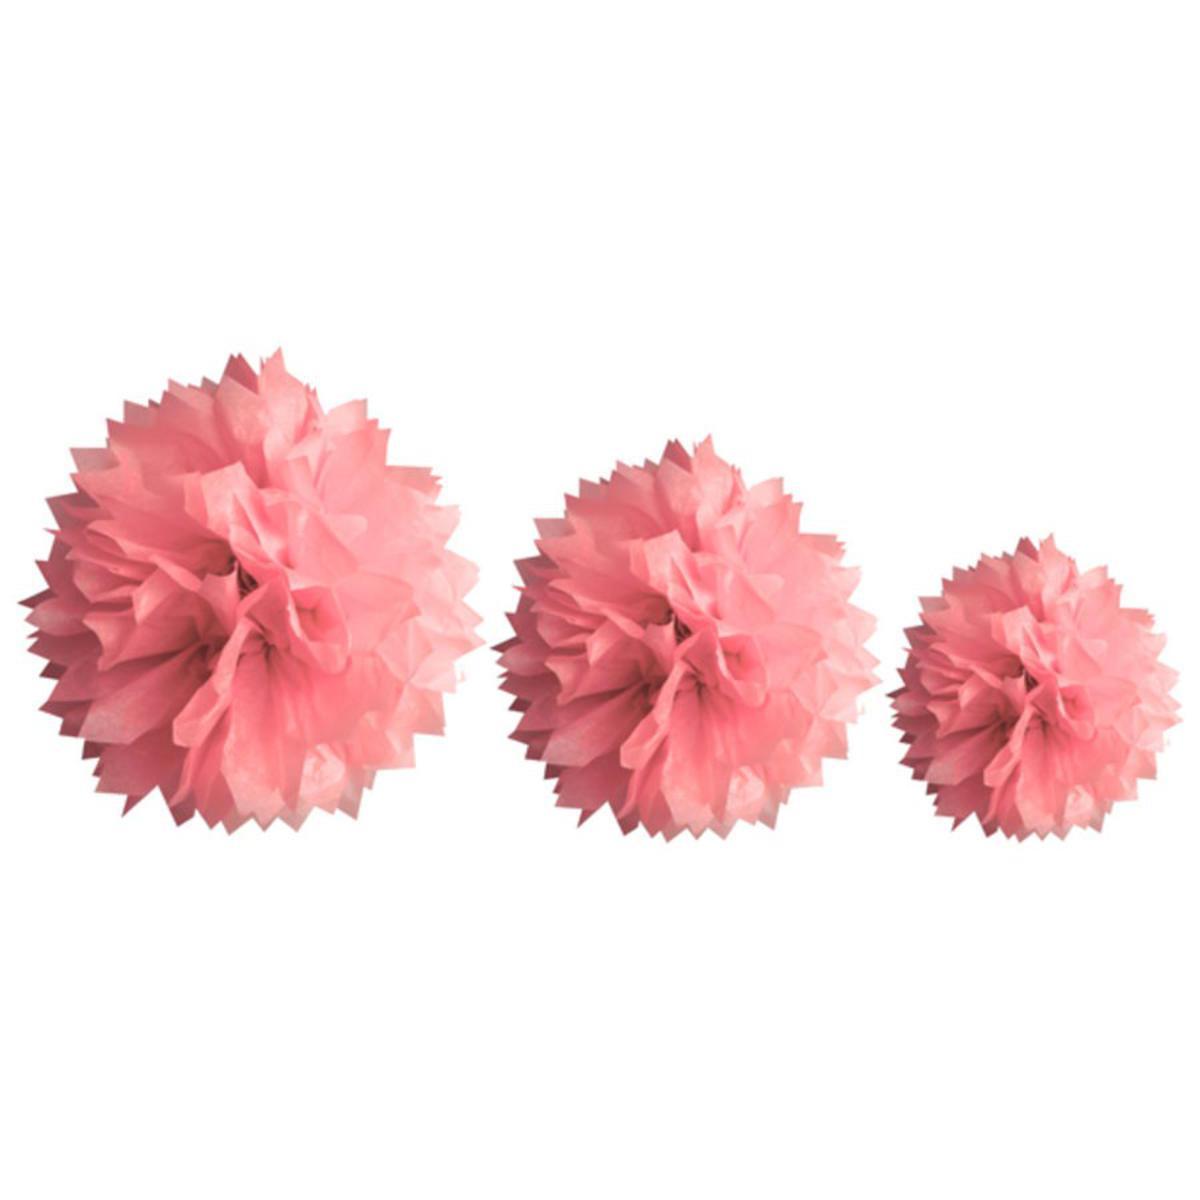 deco salle pompom tailles assorties (x 3) rose